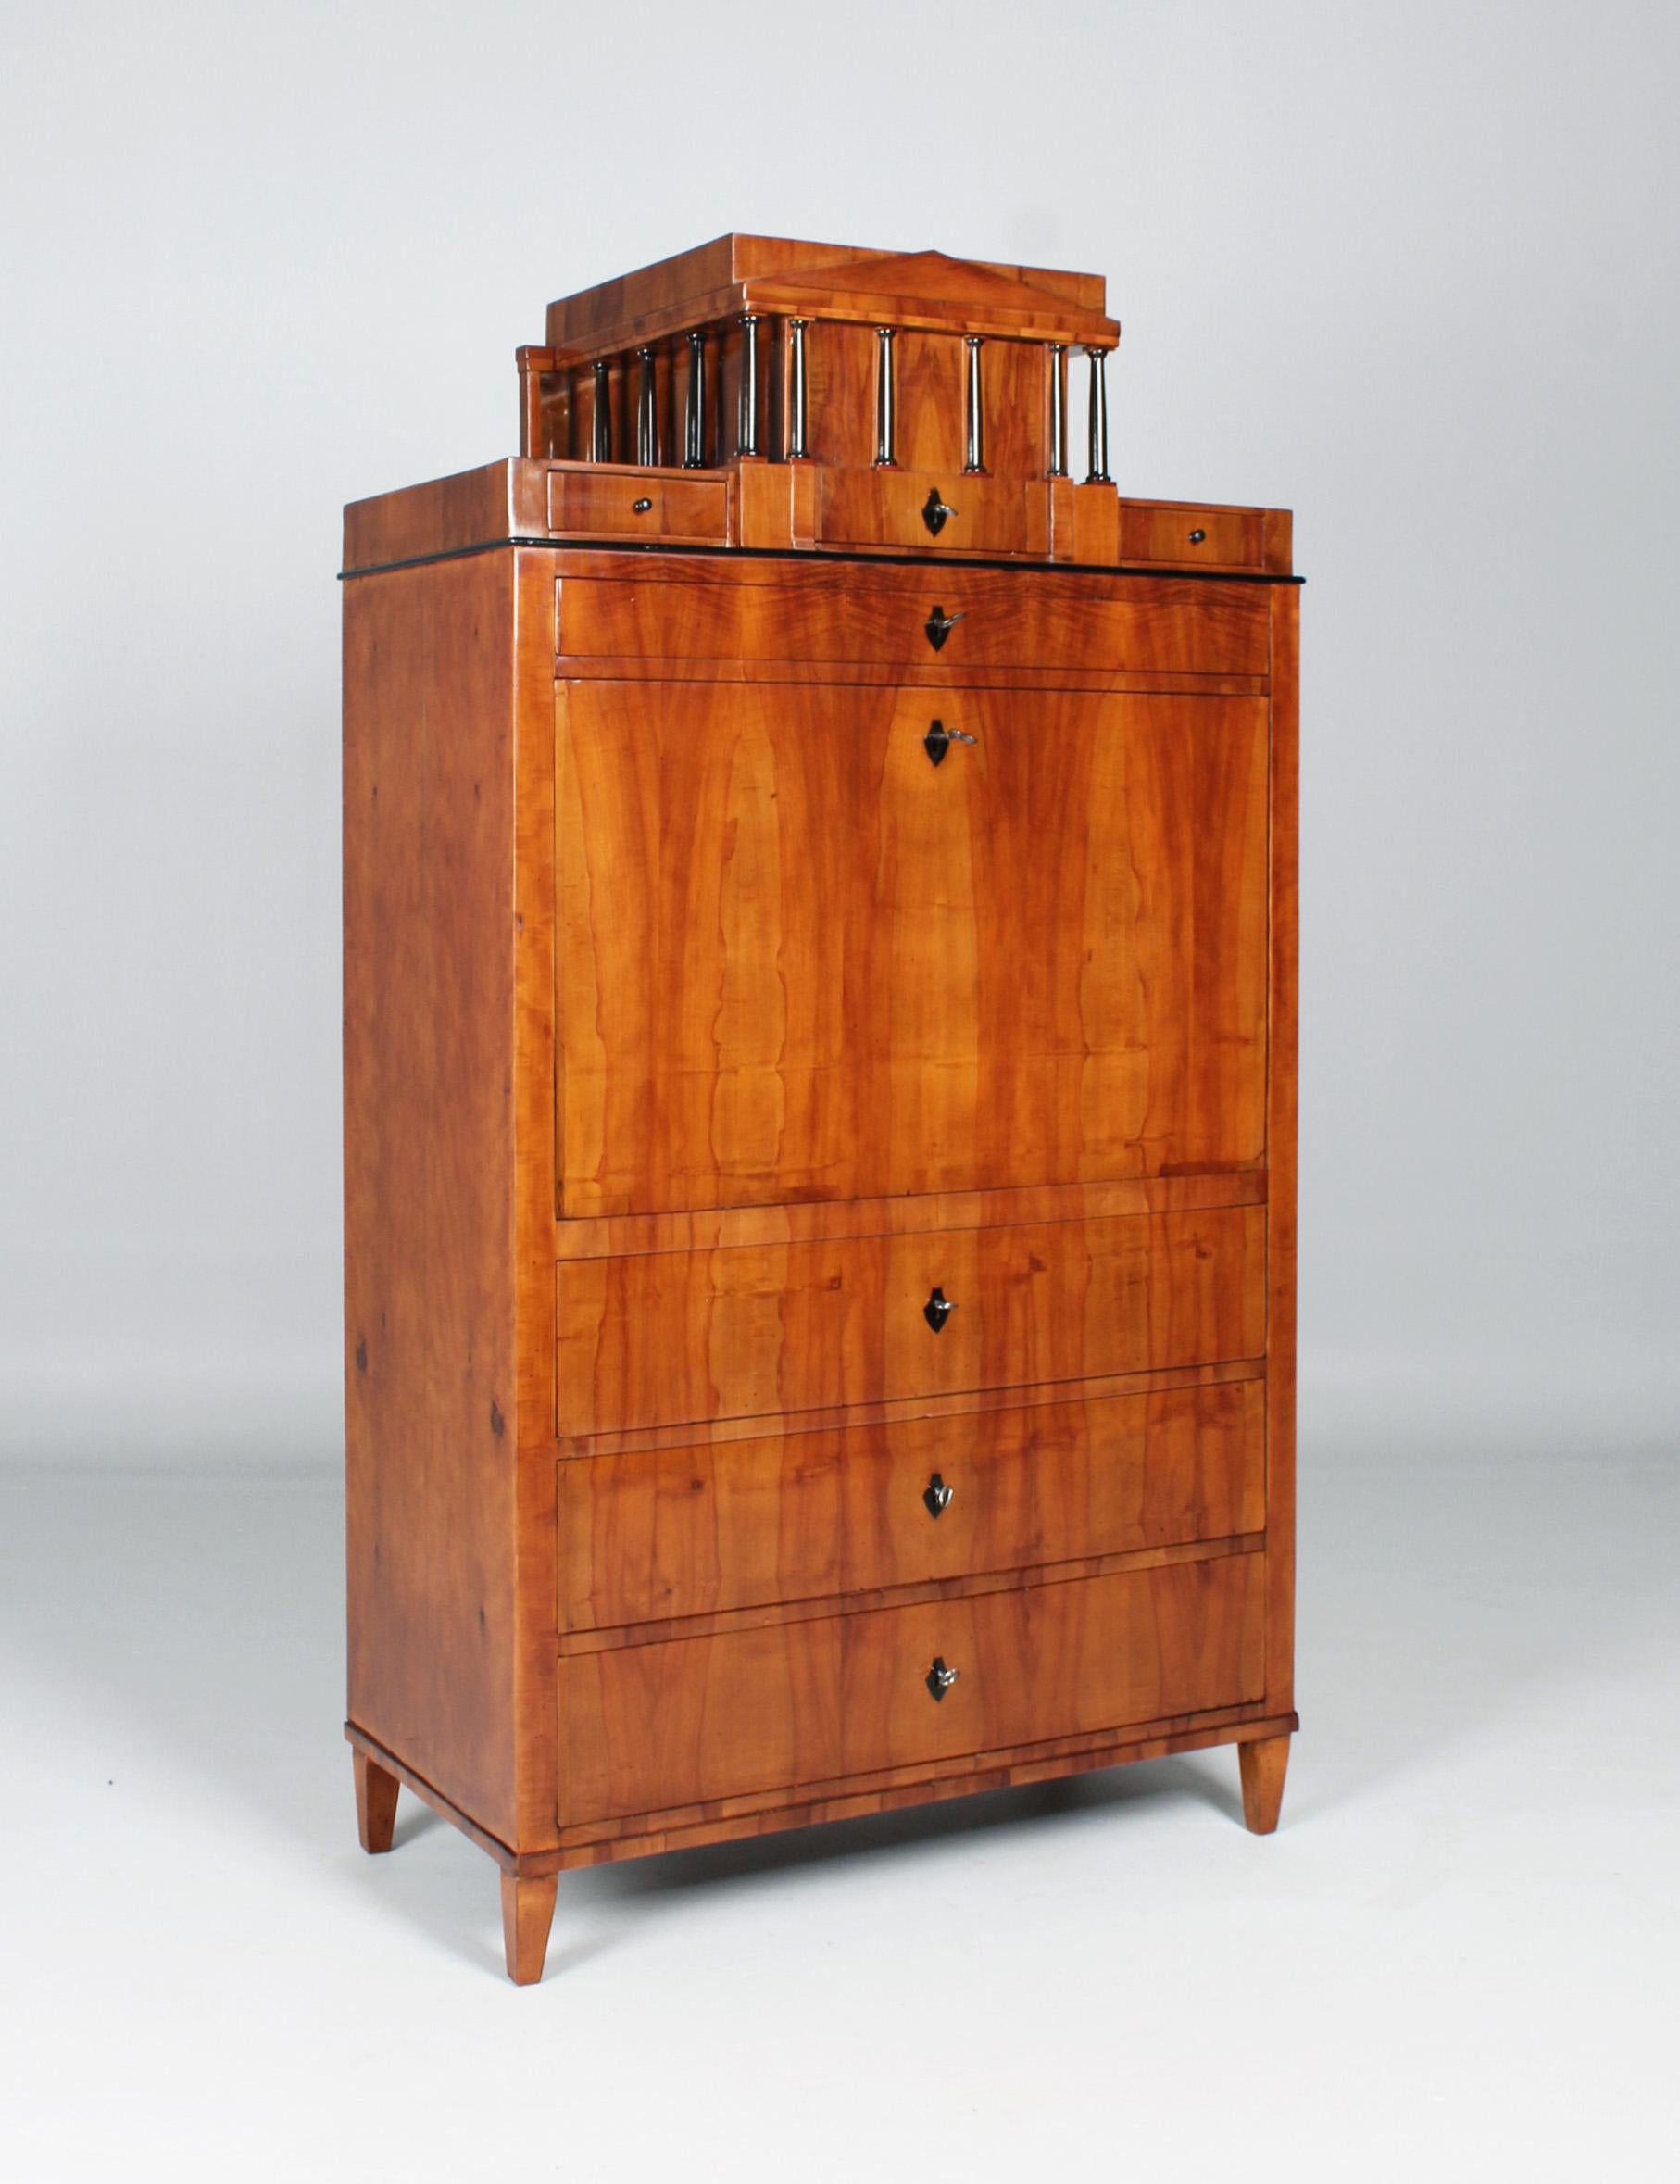 Writing cabinet with portico structure.

South Germany
Pear tree
Biedermeier around 1815

Dimensions: H x W x D: 174 x 95 x 49 cm

Description:
Strictly cubist piece of furniture standing on pointed legs and veneered in pear.

The